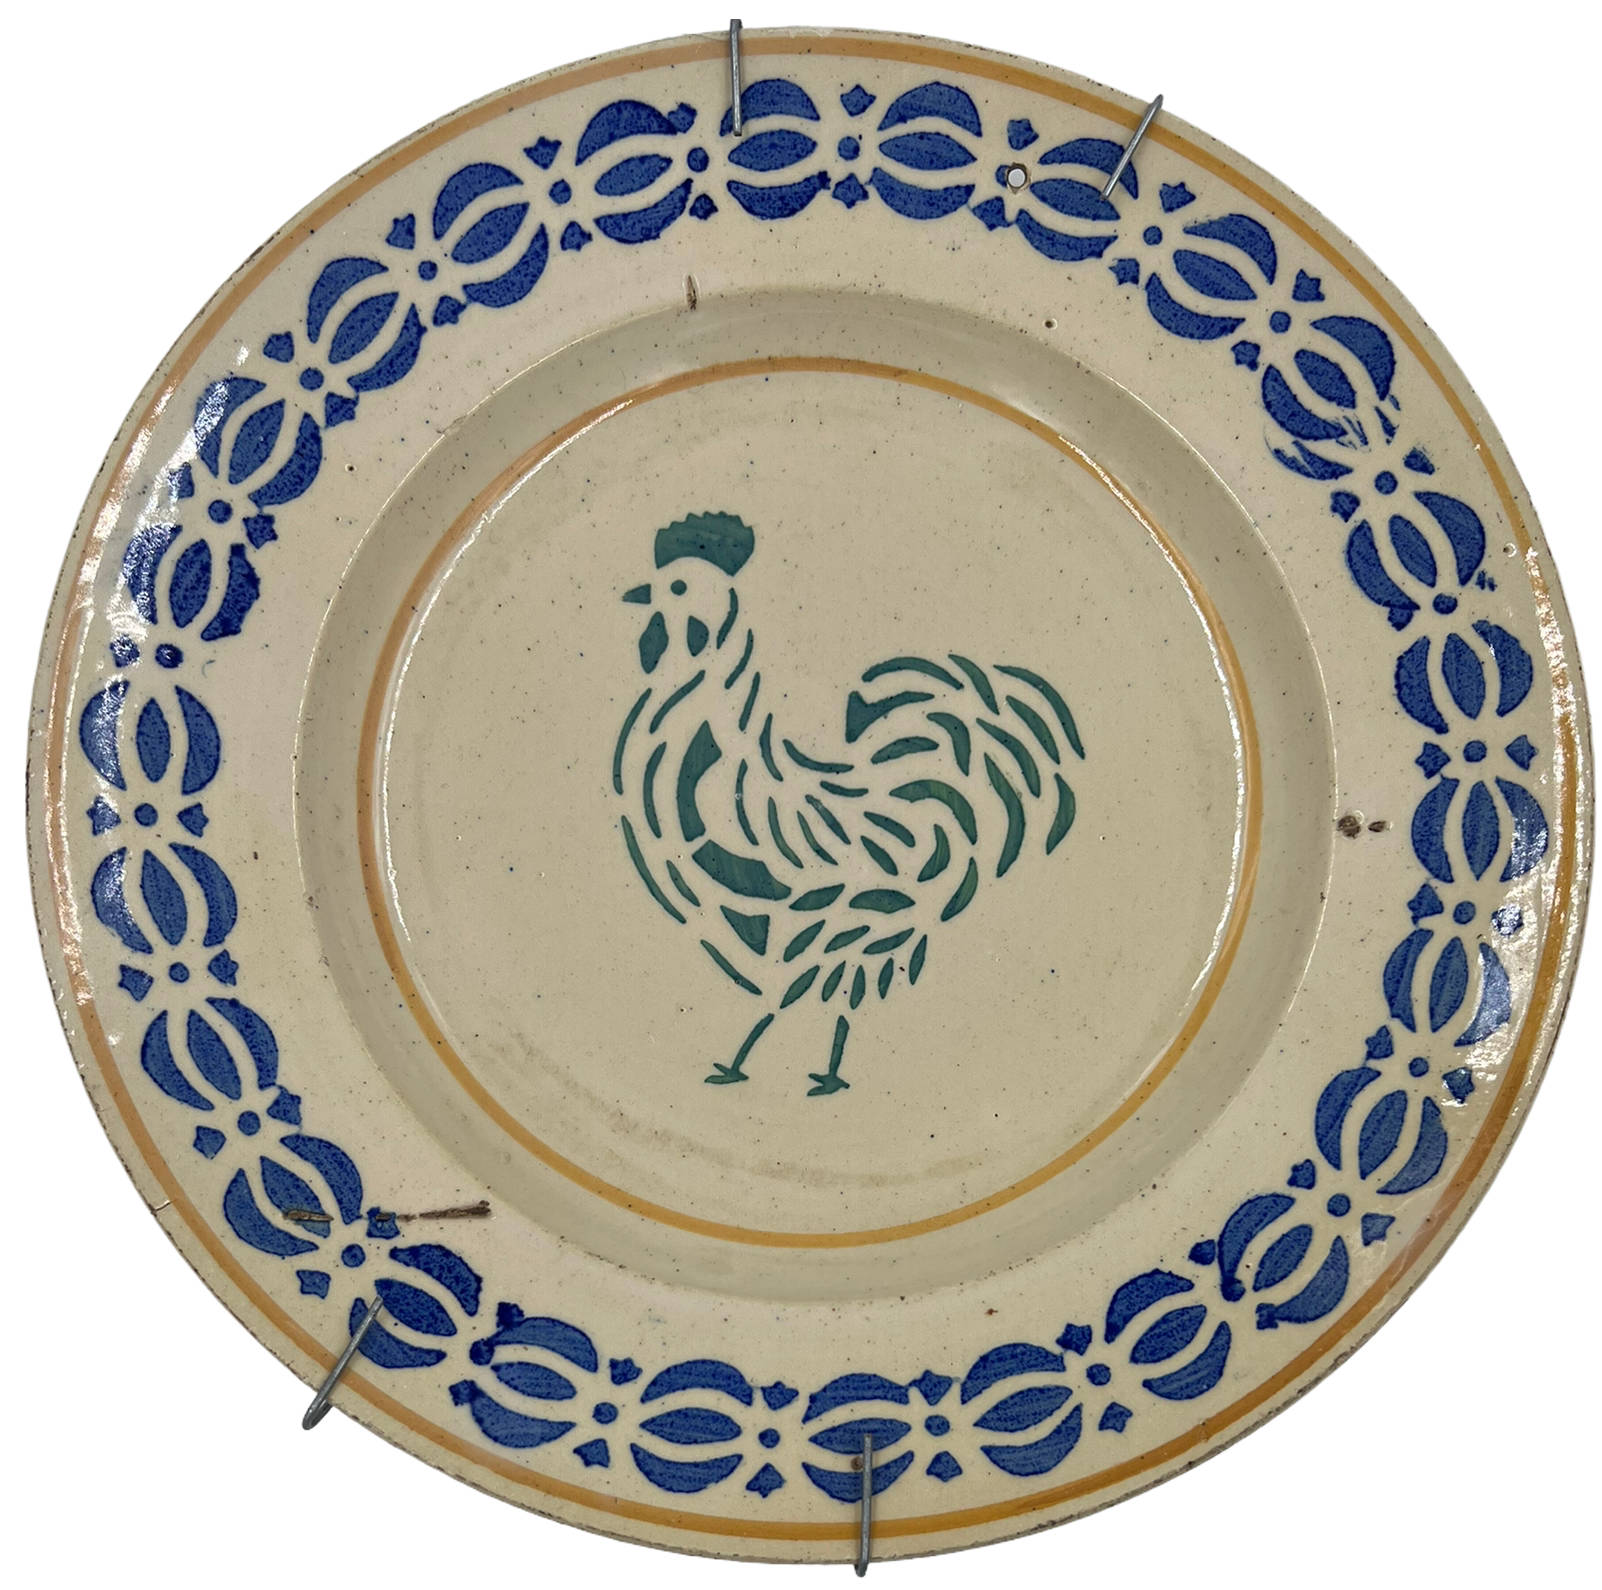 Rooster-Plate-Antiquers.jpg